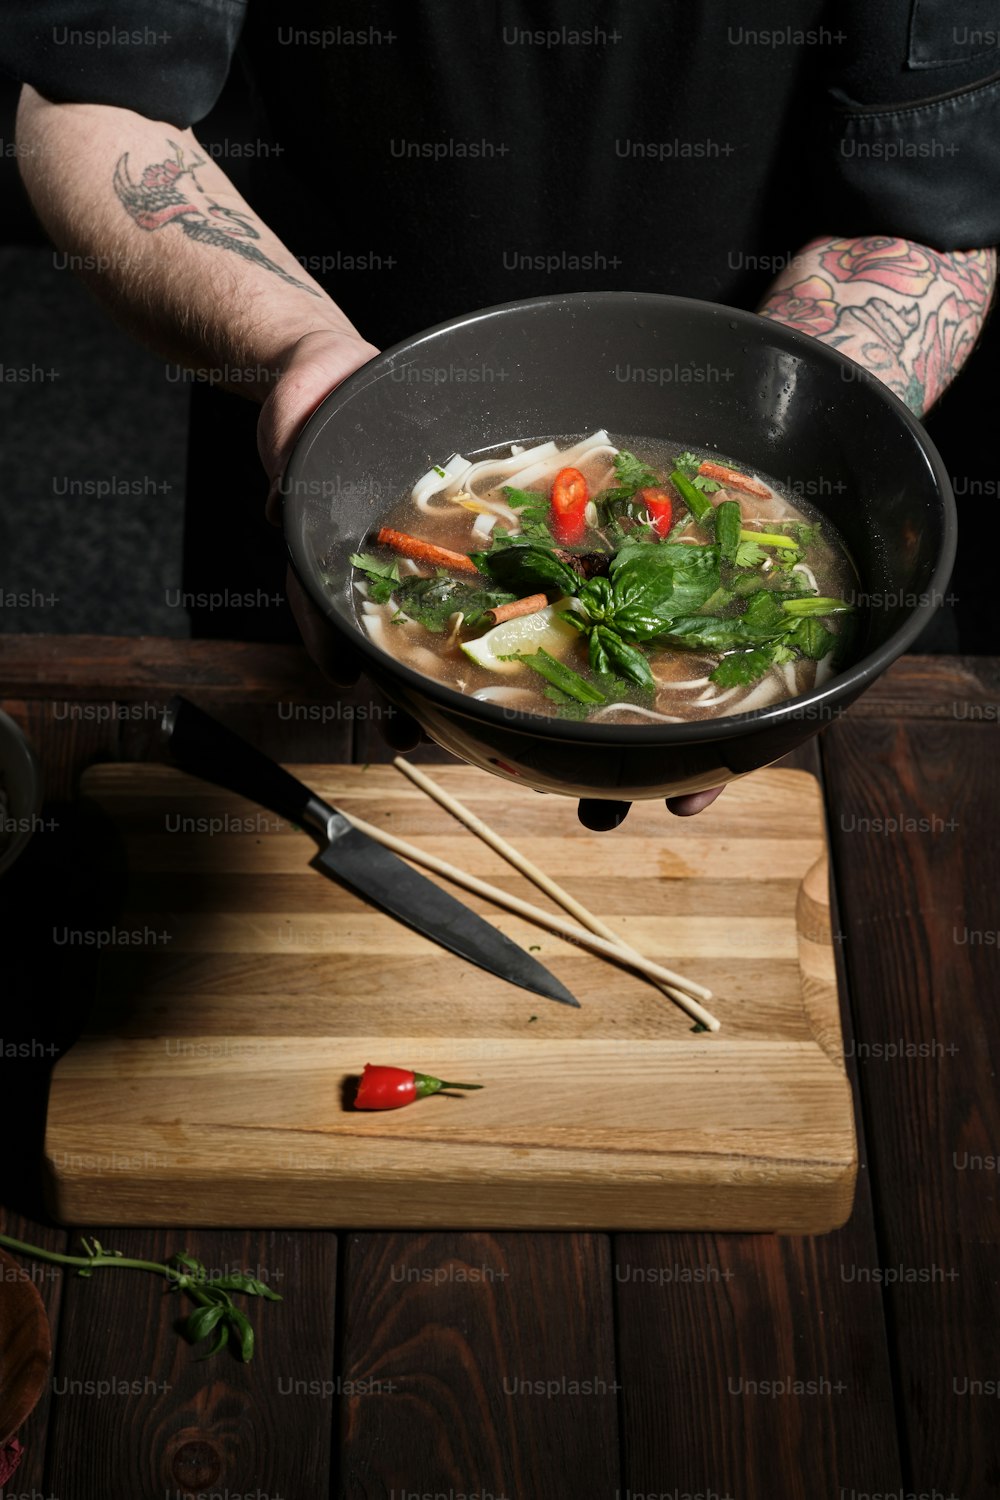 Close up of chef's hands holding dish with freshly made asian food, offering it towards camera